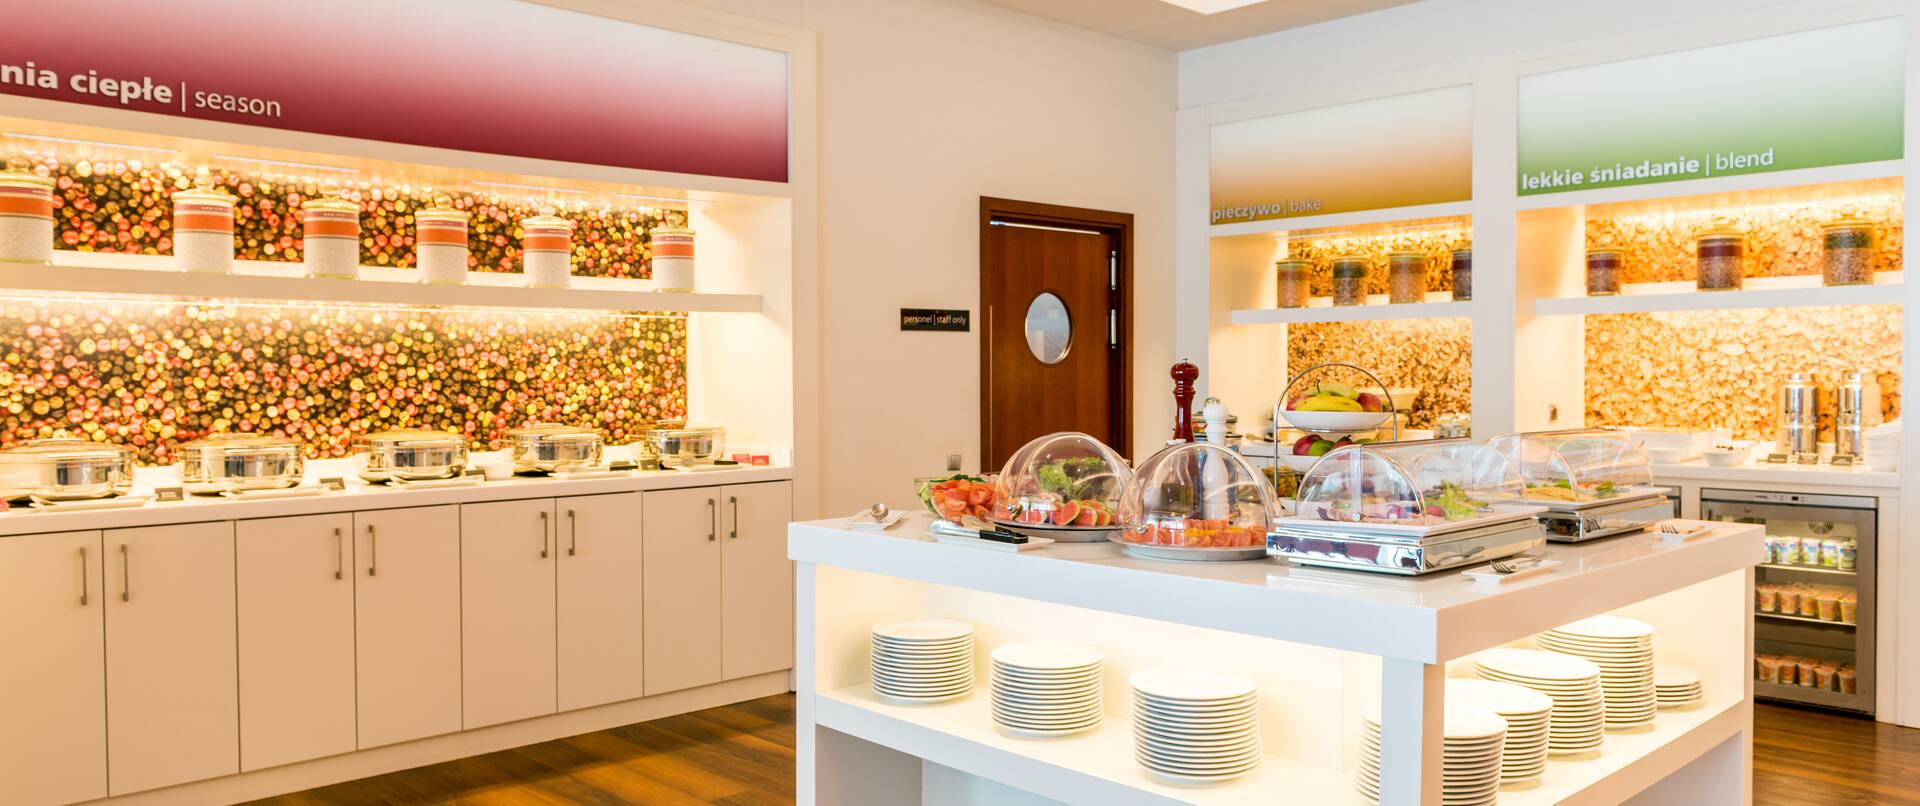 Hampton by Hilton Warsaw Airport Hotel, Poland - Bright Breakfast Room with Dishes on Counter